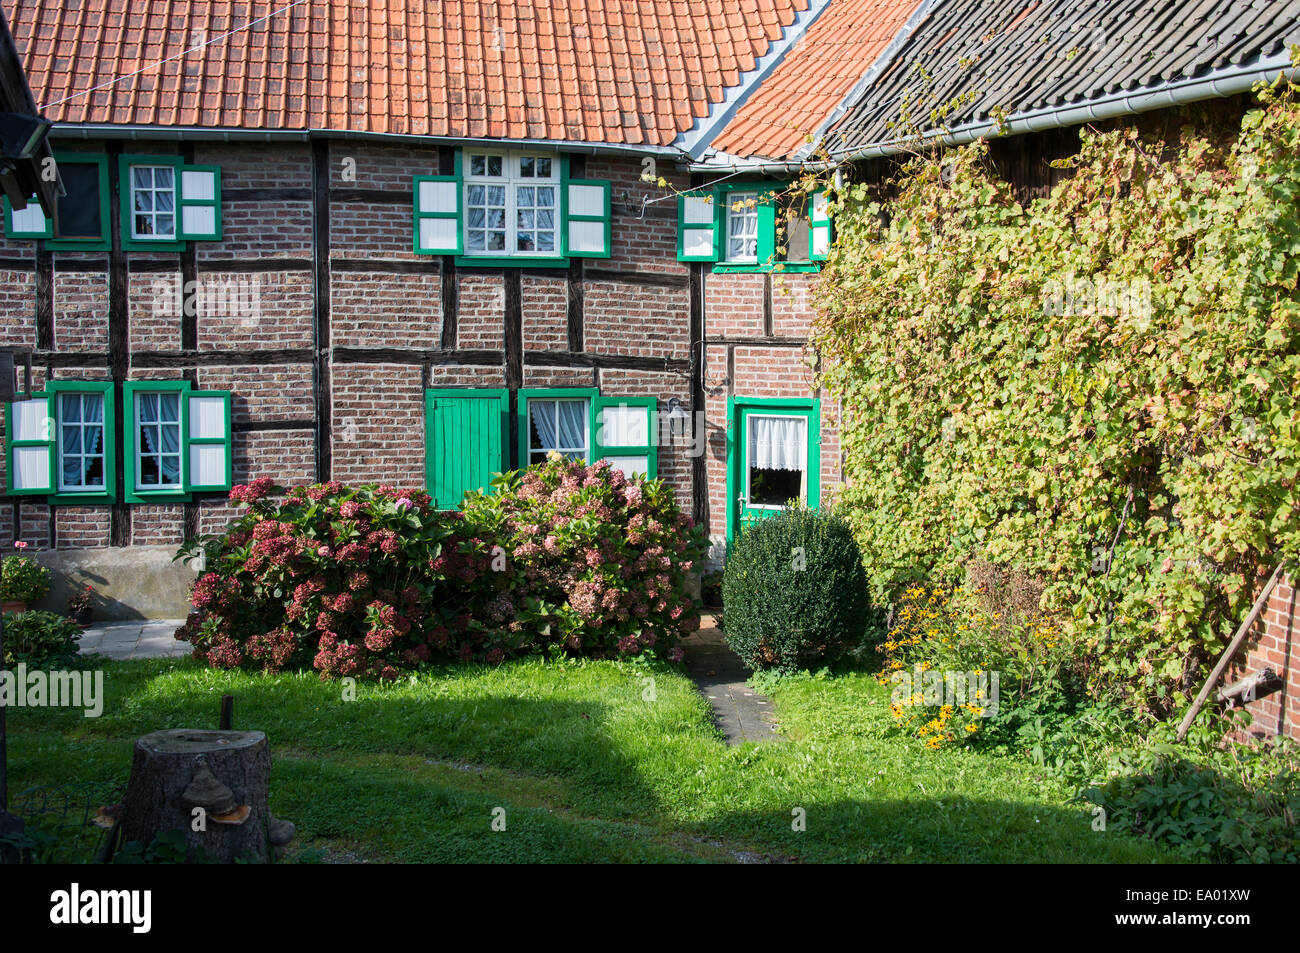 garden in front of old fram house with windows and green shutters Stock Photo